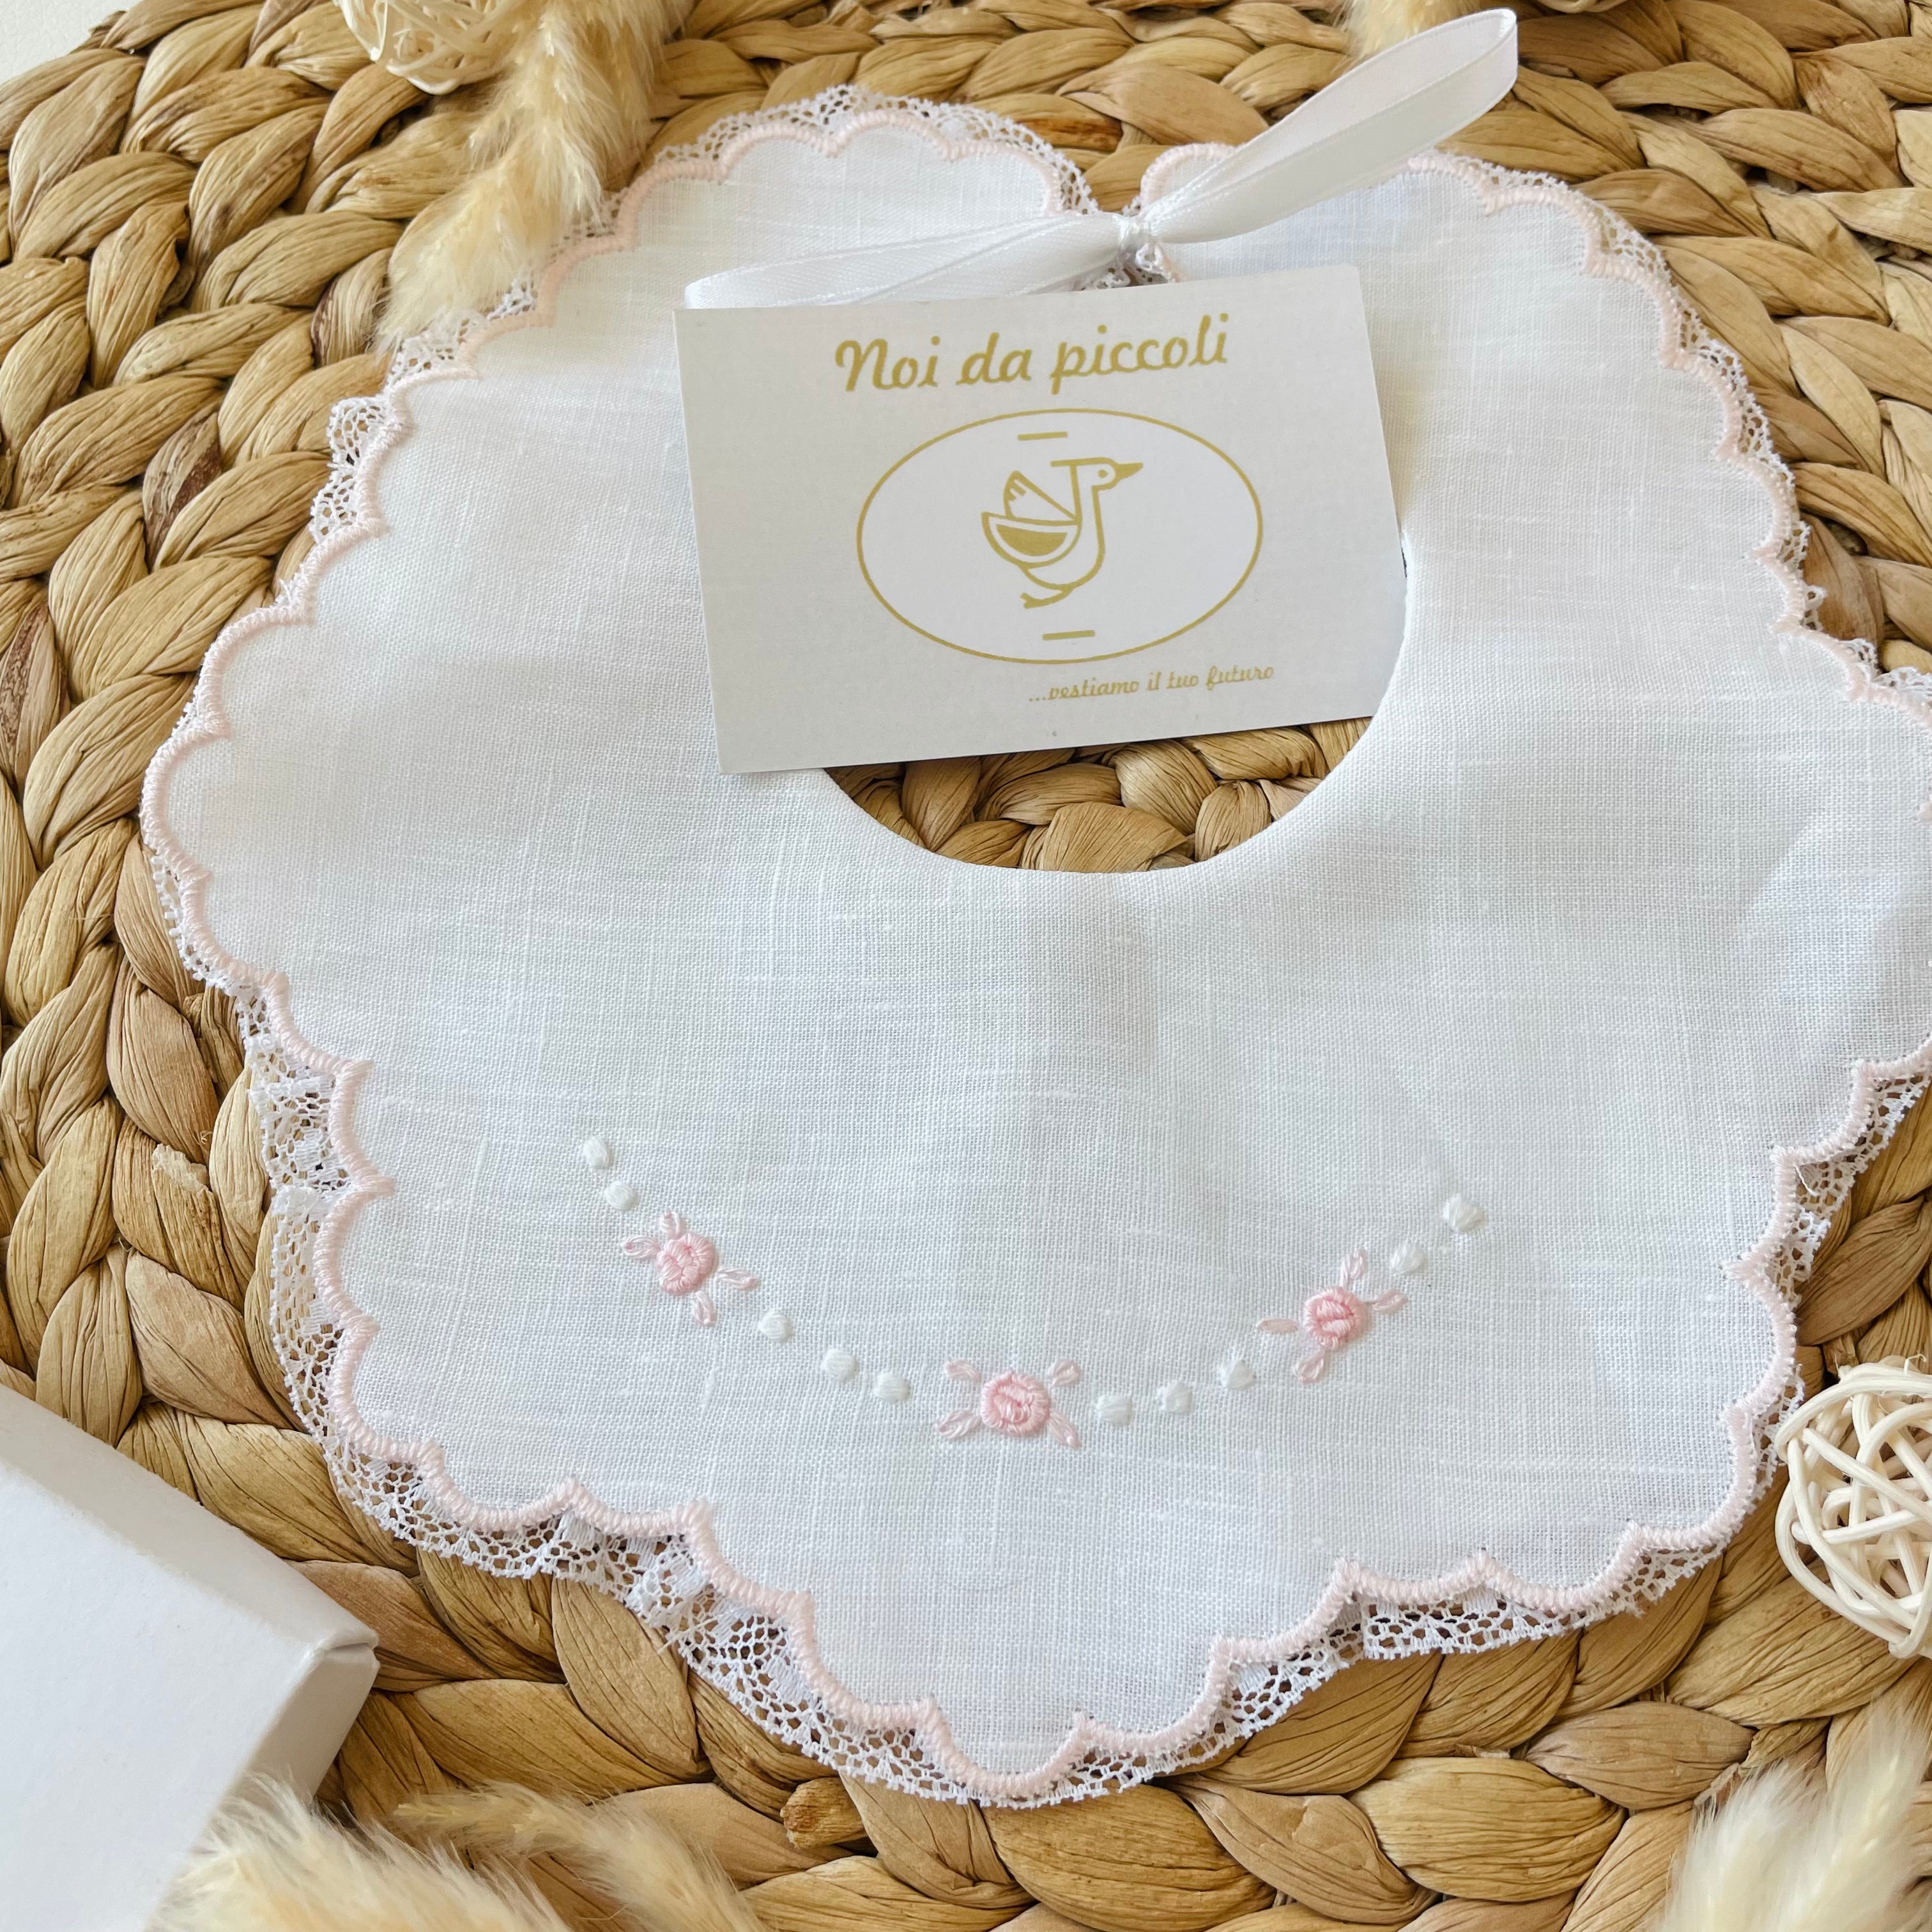 HAND EMBROIDERED WHITE LINEN BIB WITH PINK EMBROIDERY